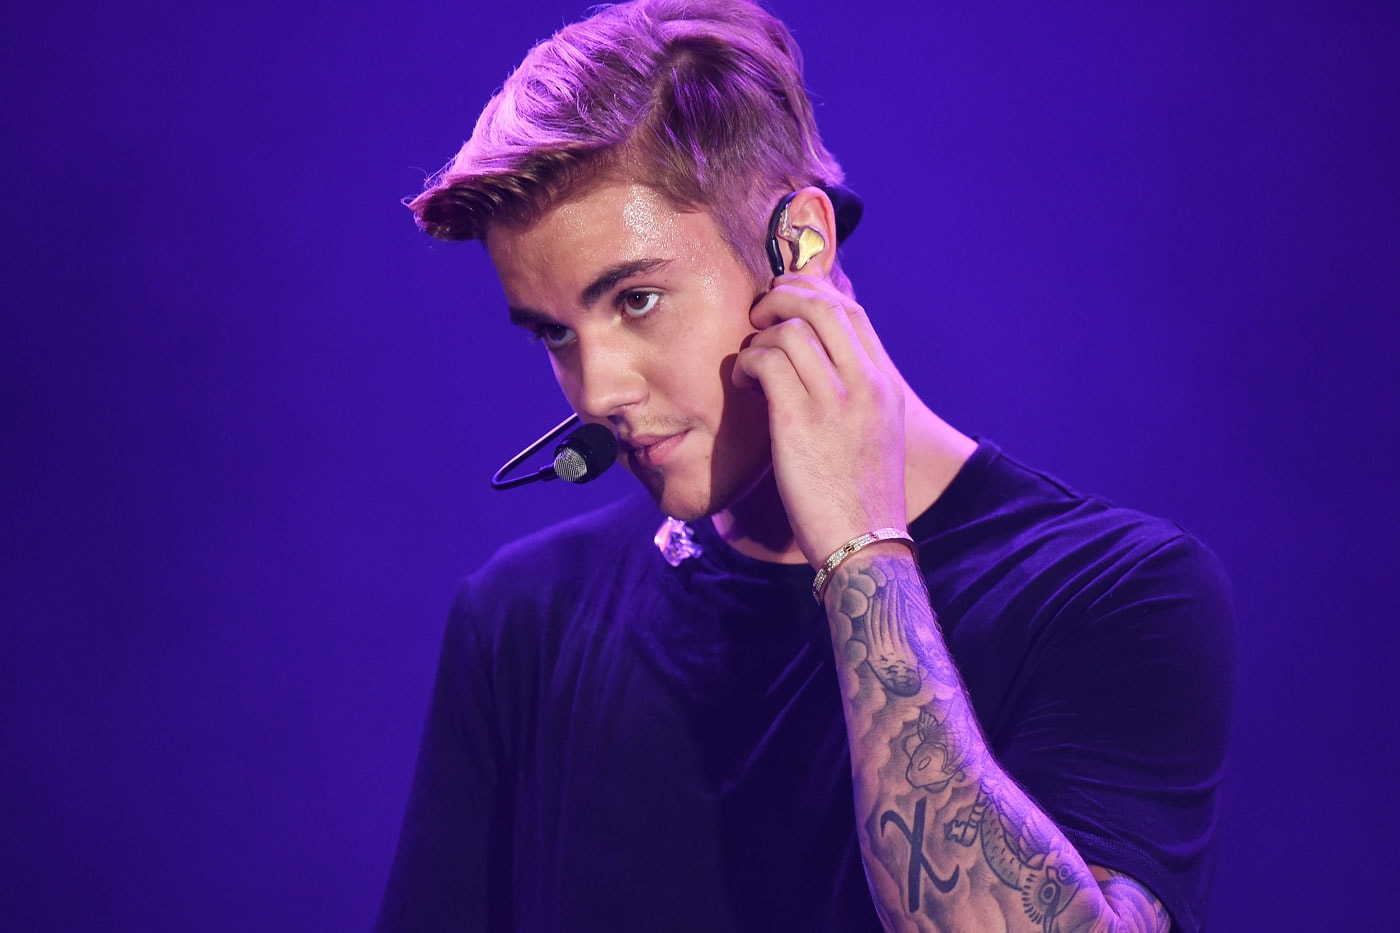 Watch Justin Bieber Drum off Against Questlove and Perform "What Do You Mean?" With The Roots